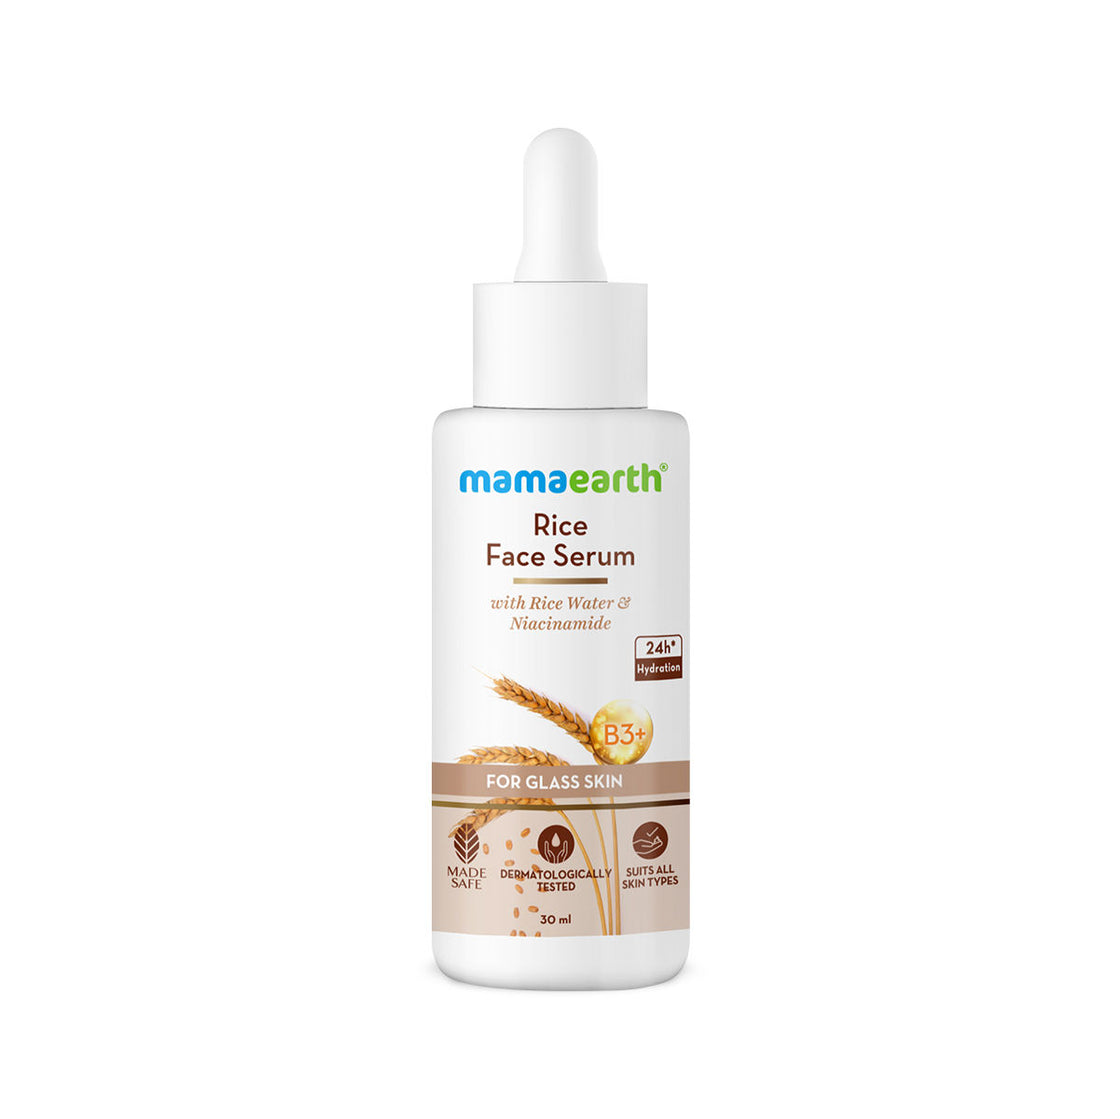 Mamaearth Rice Face Serum For Glowing Skin With Rice Water & Niacinamide For Glass Skin-8